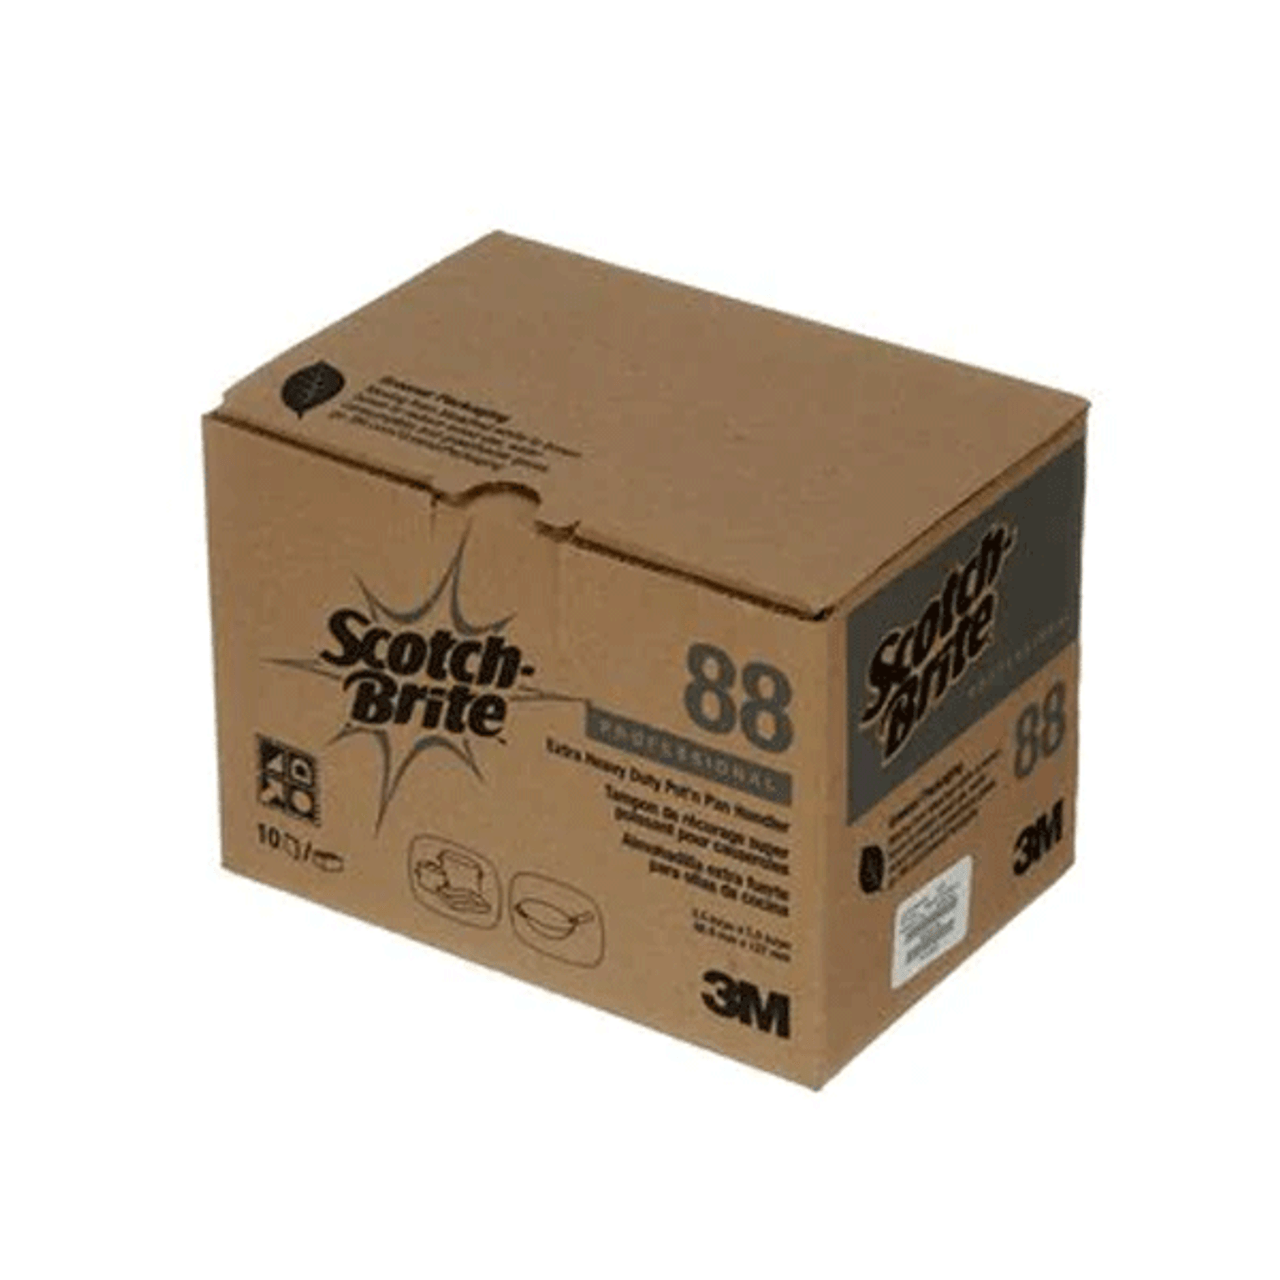 https://cdn11.bigcommerce.com/s-g3i86bef61/images/stencil/1280x1280/products/4416/4553/Scotch-Brite-88-Heavy-Duty-Pot-N-Pan-Handler-Box__07769.1677180198.png?c=1?imbypass=on